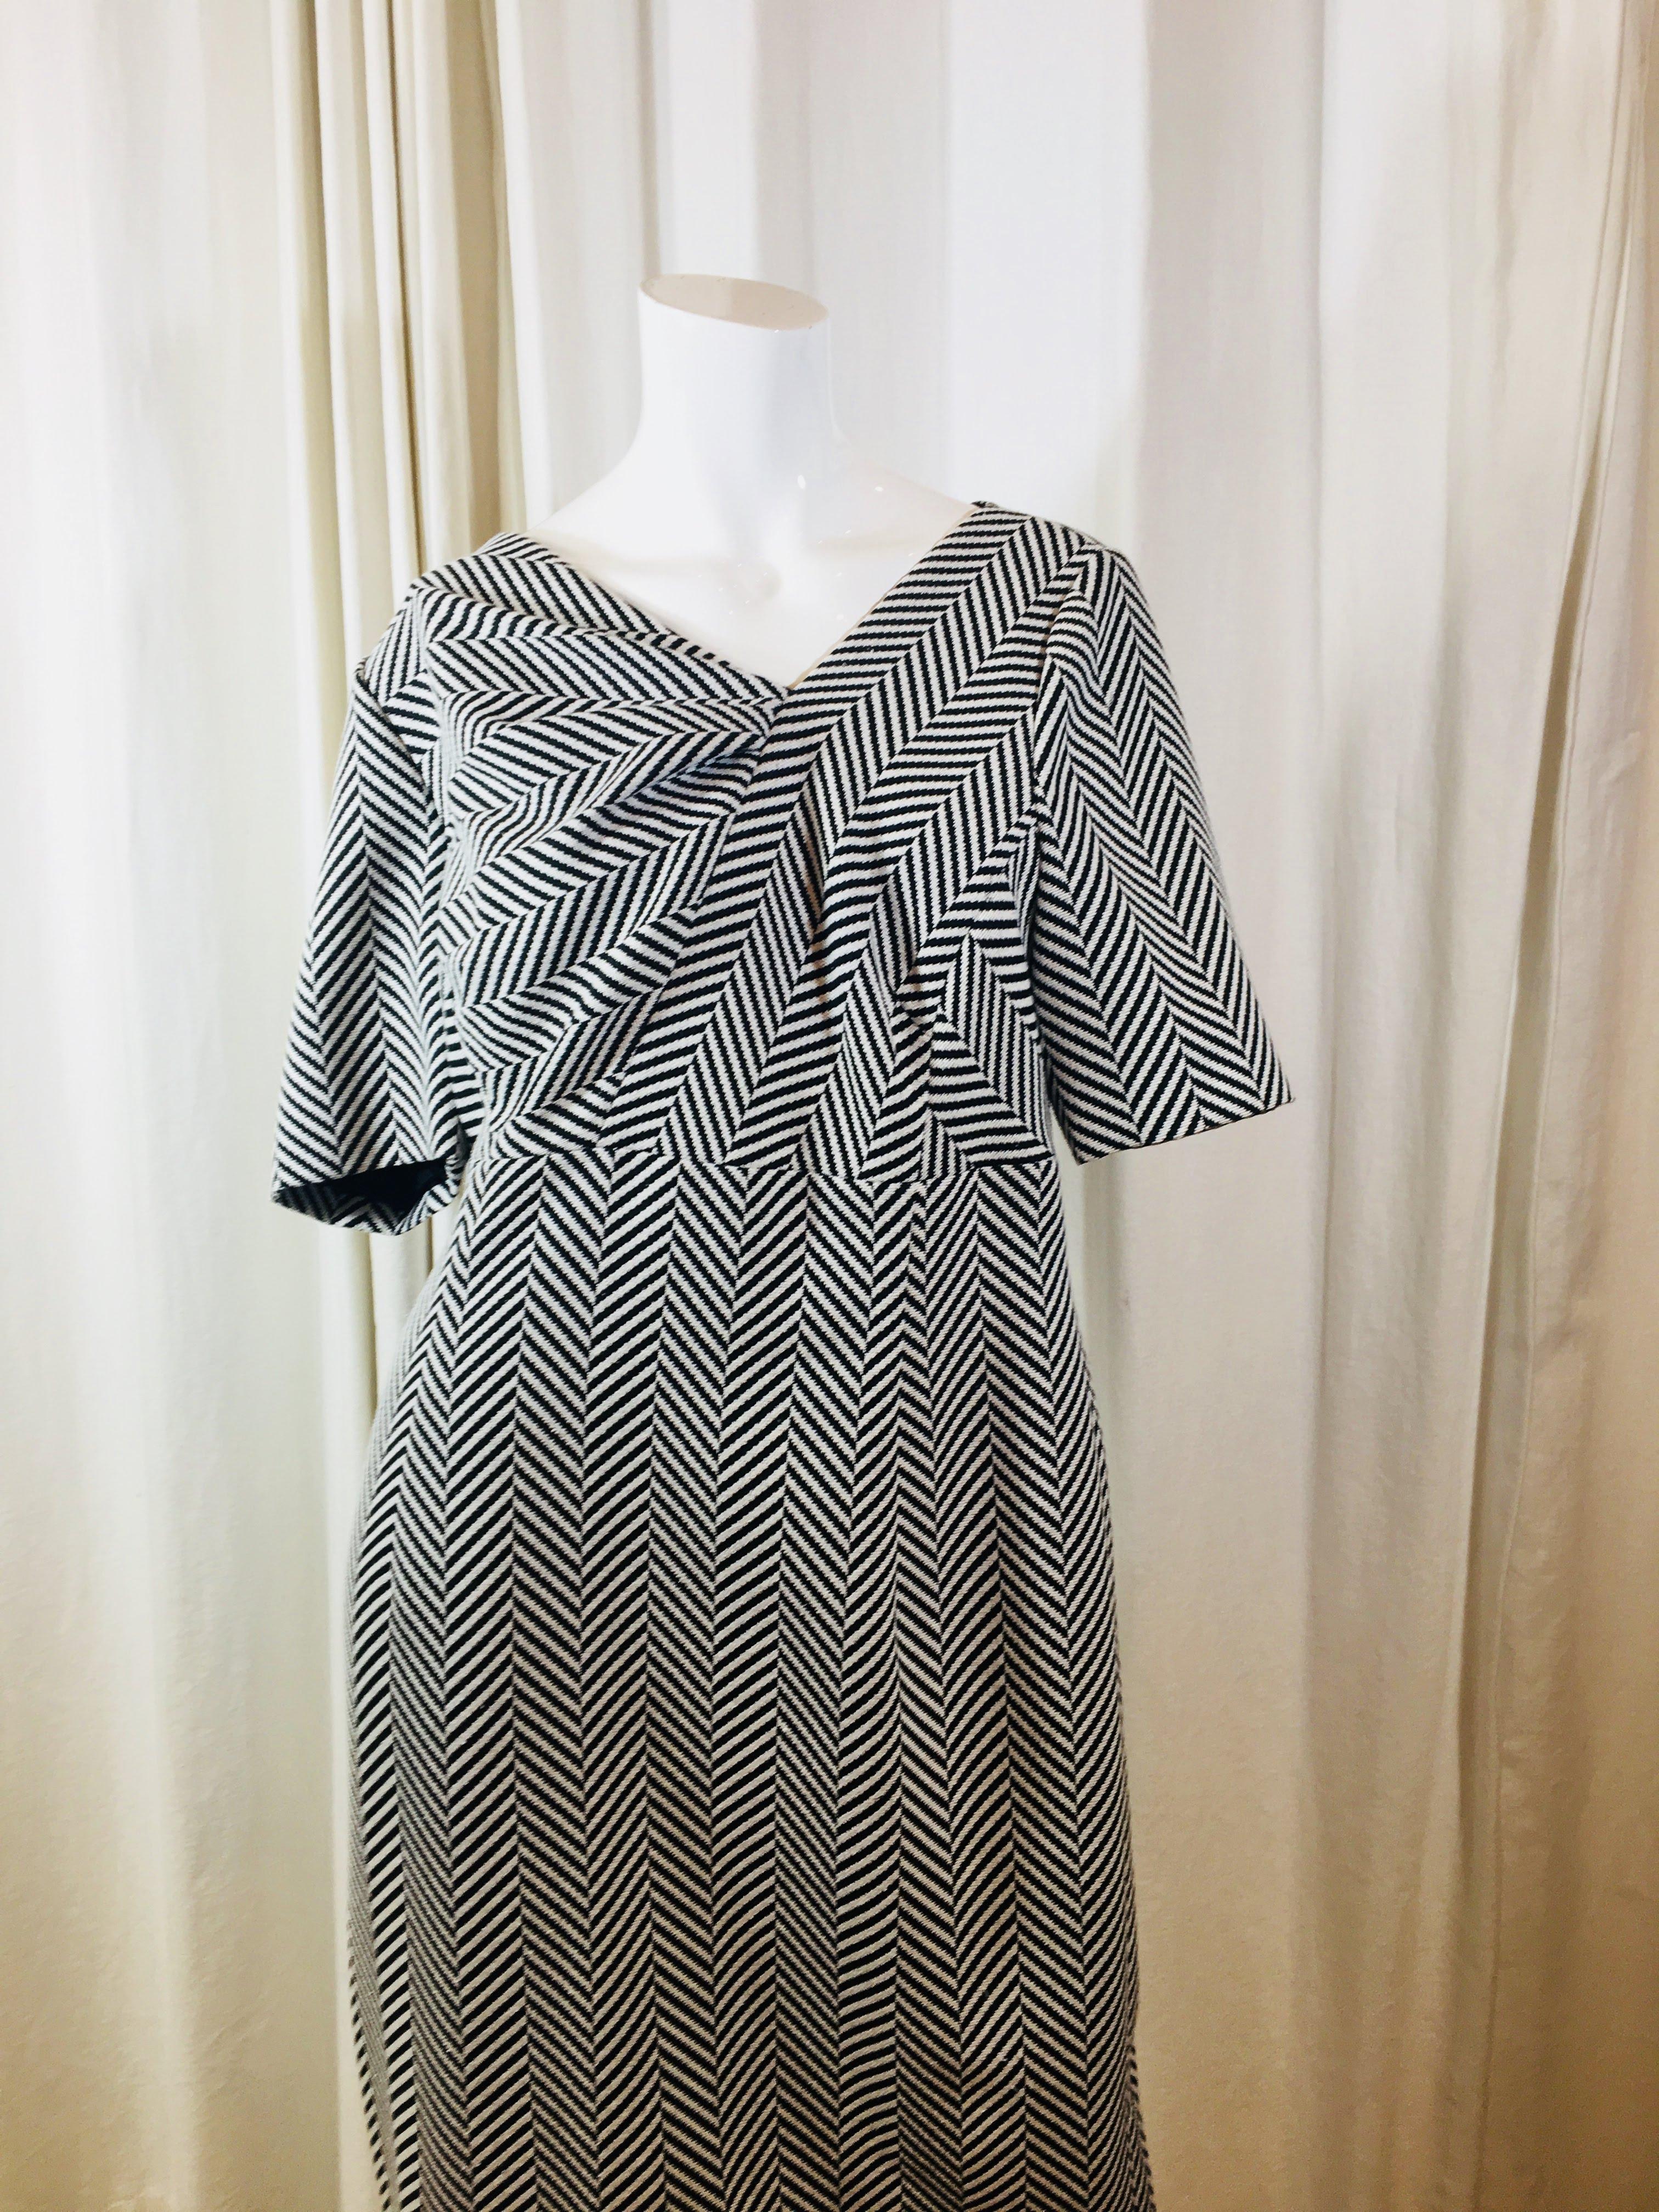 Escada Dress with Assymetrical and Gathered Neckline, Off-Herringbone Print in Black and White Cotton and Short Sleeves. 